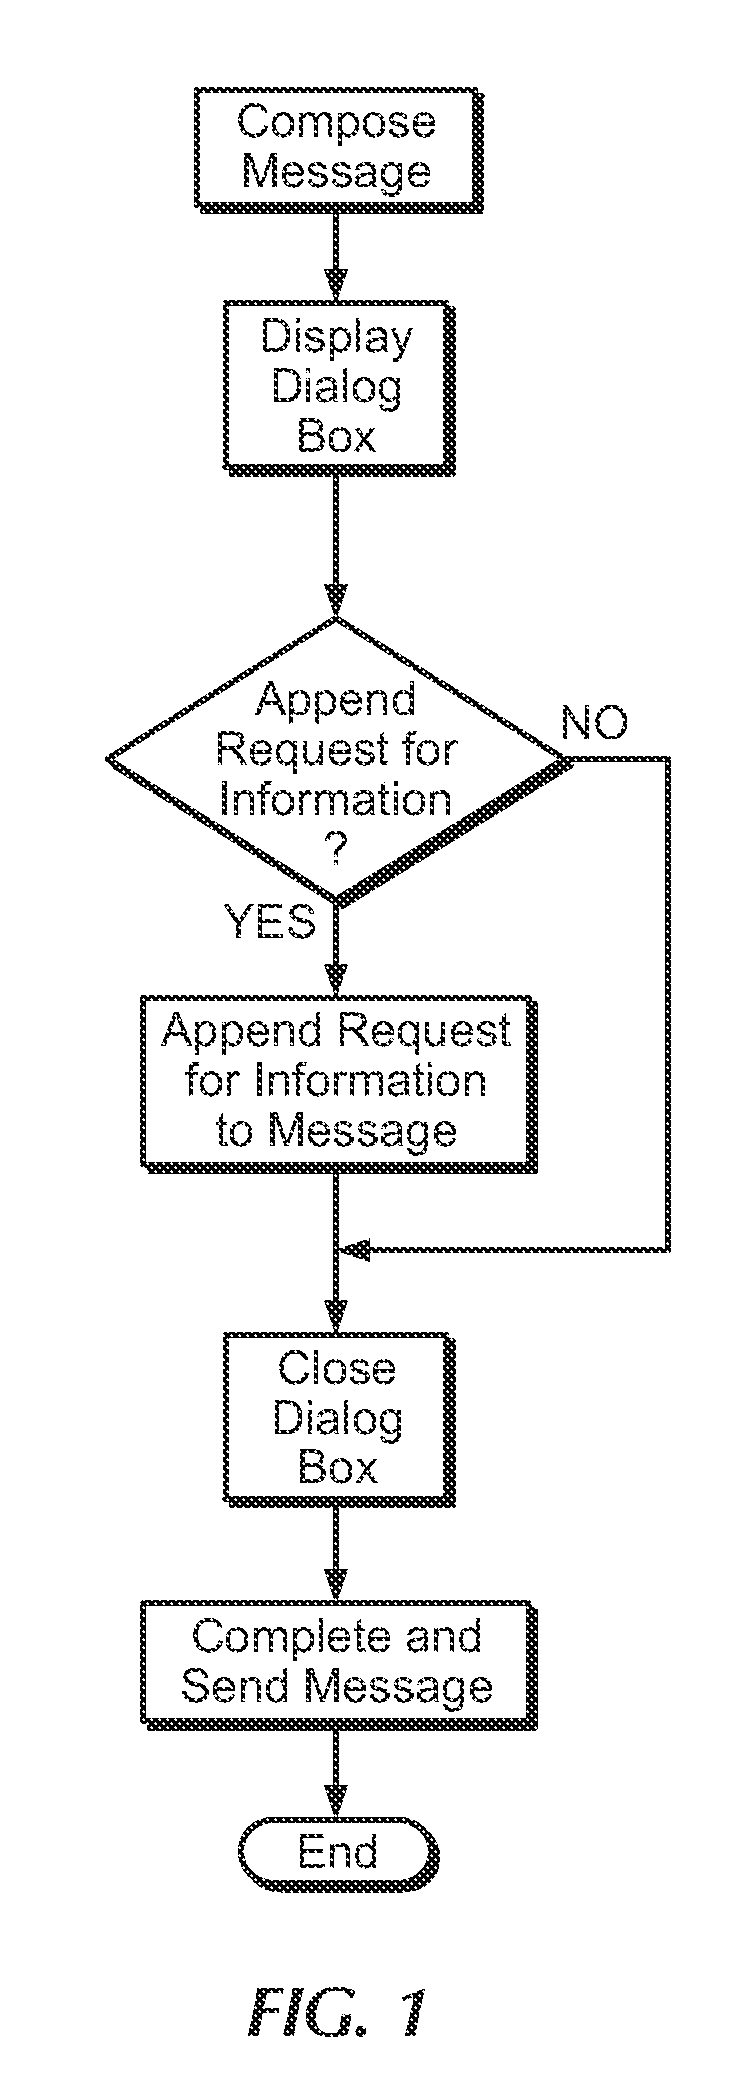 System and method for automatic opportunistic data and image sharing